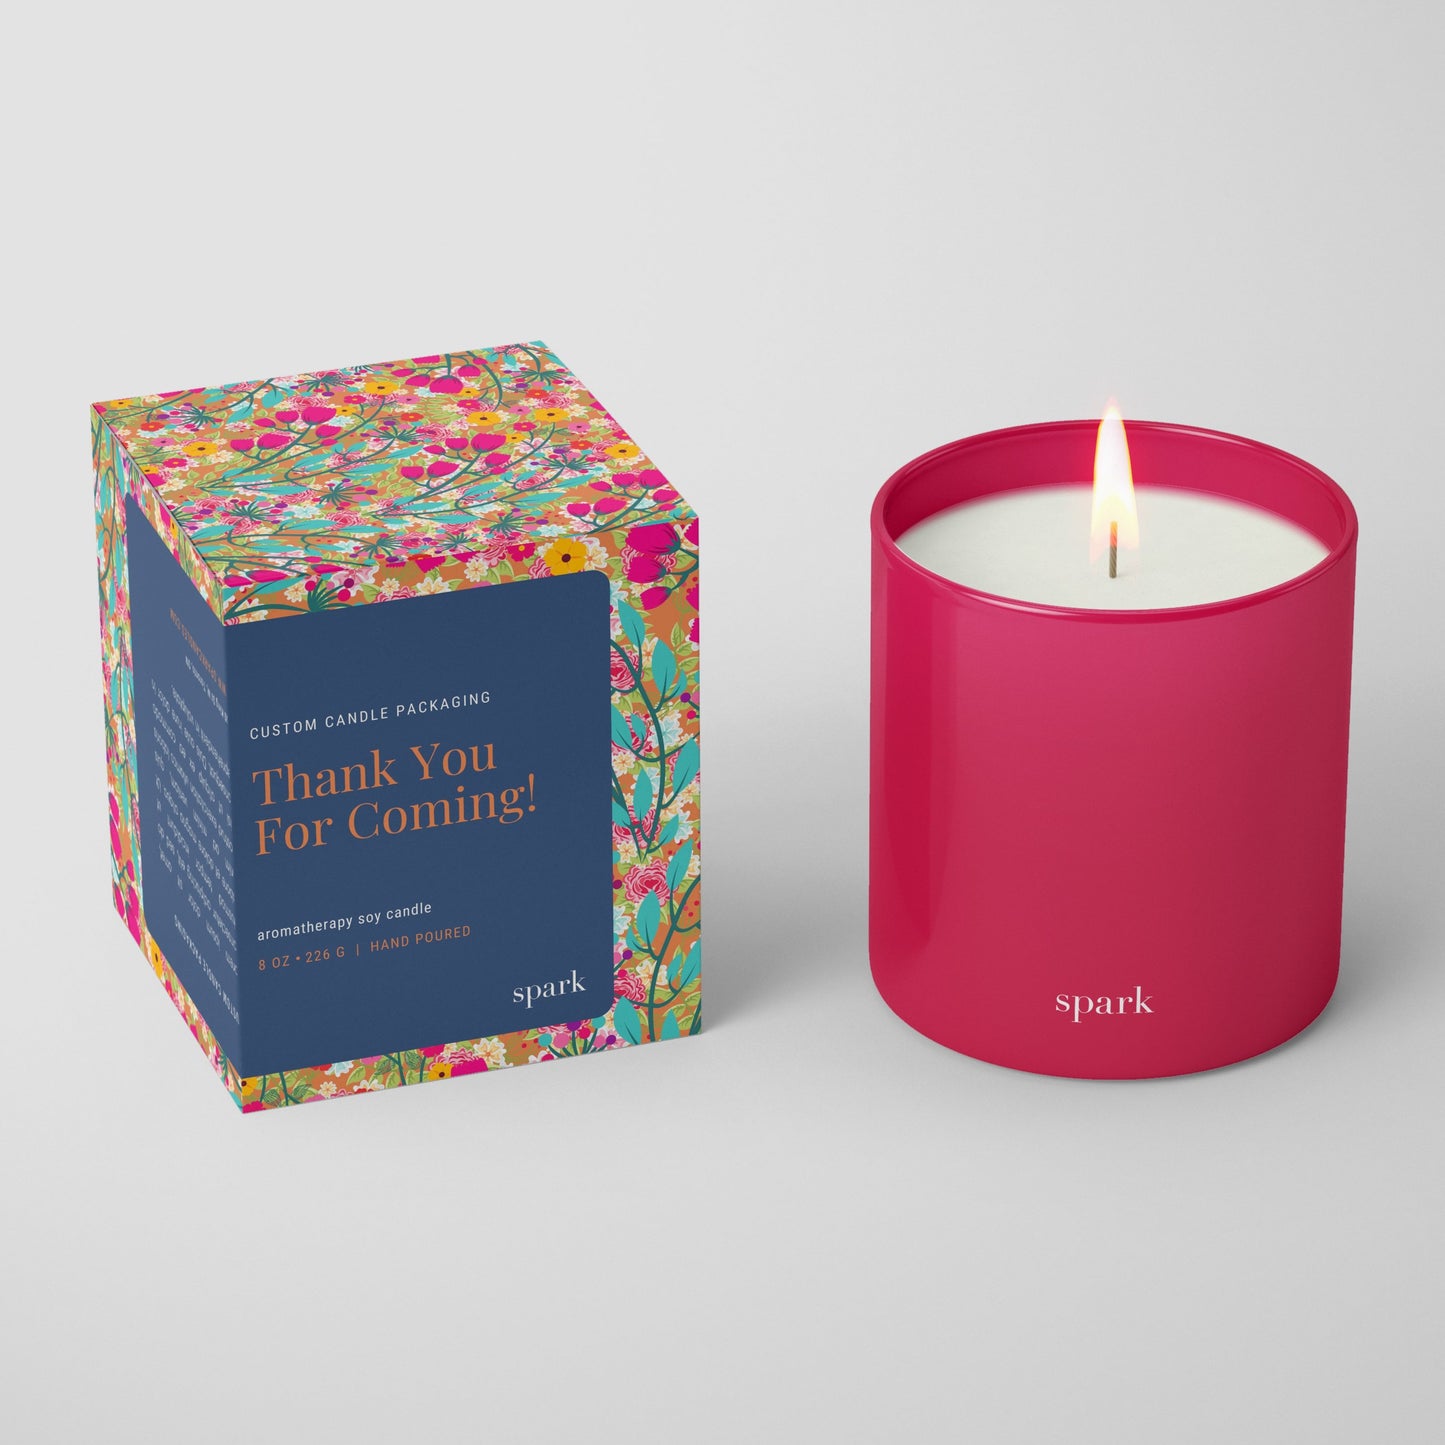 Promotional Branded Candle Gift Sets | Total Merchandise